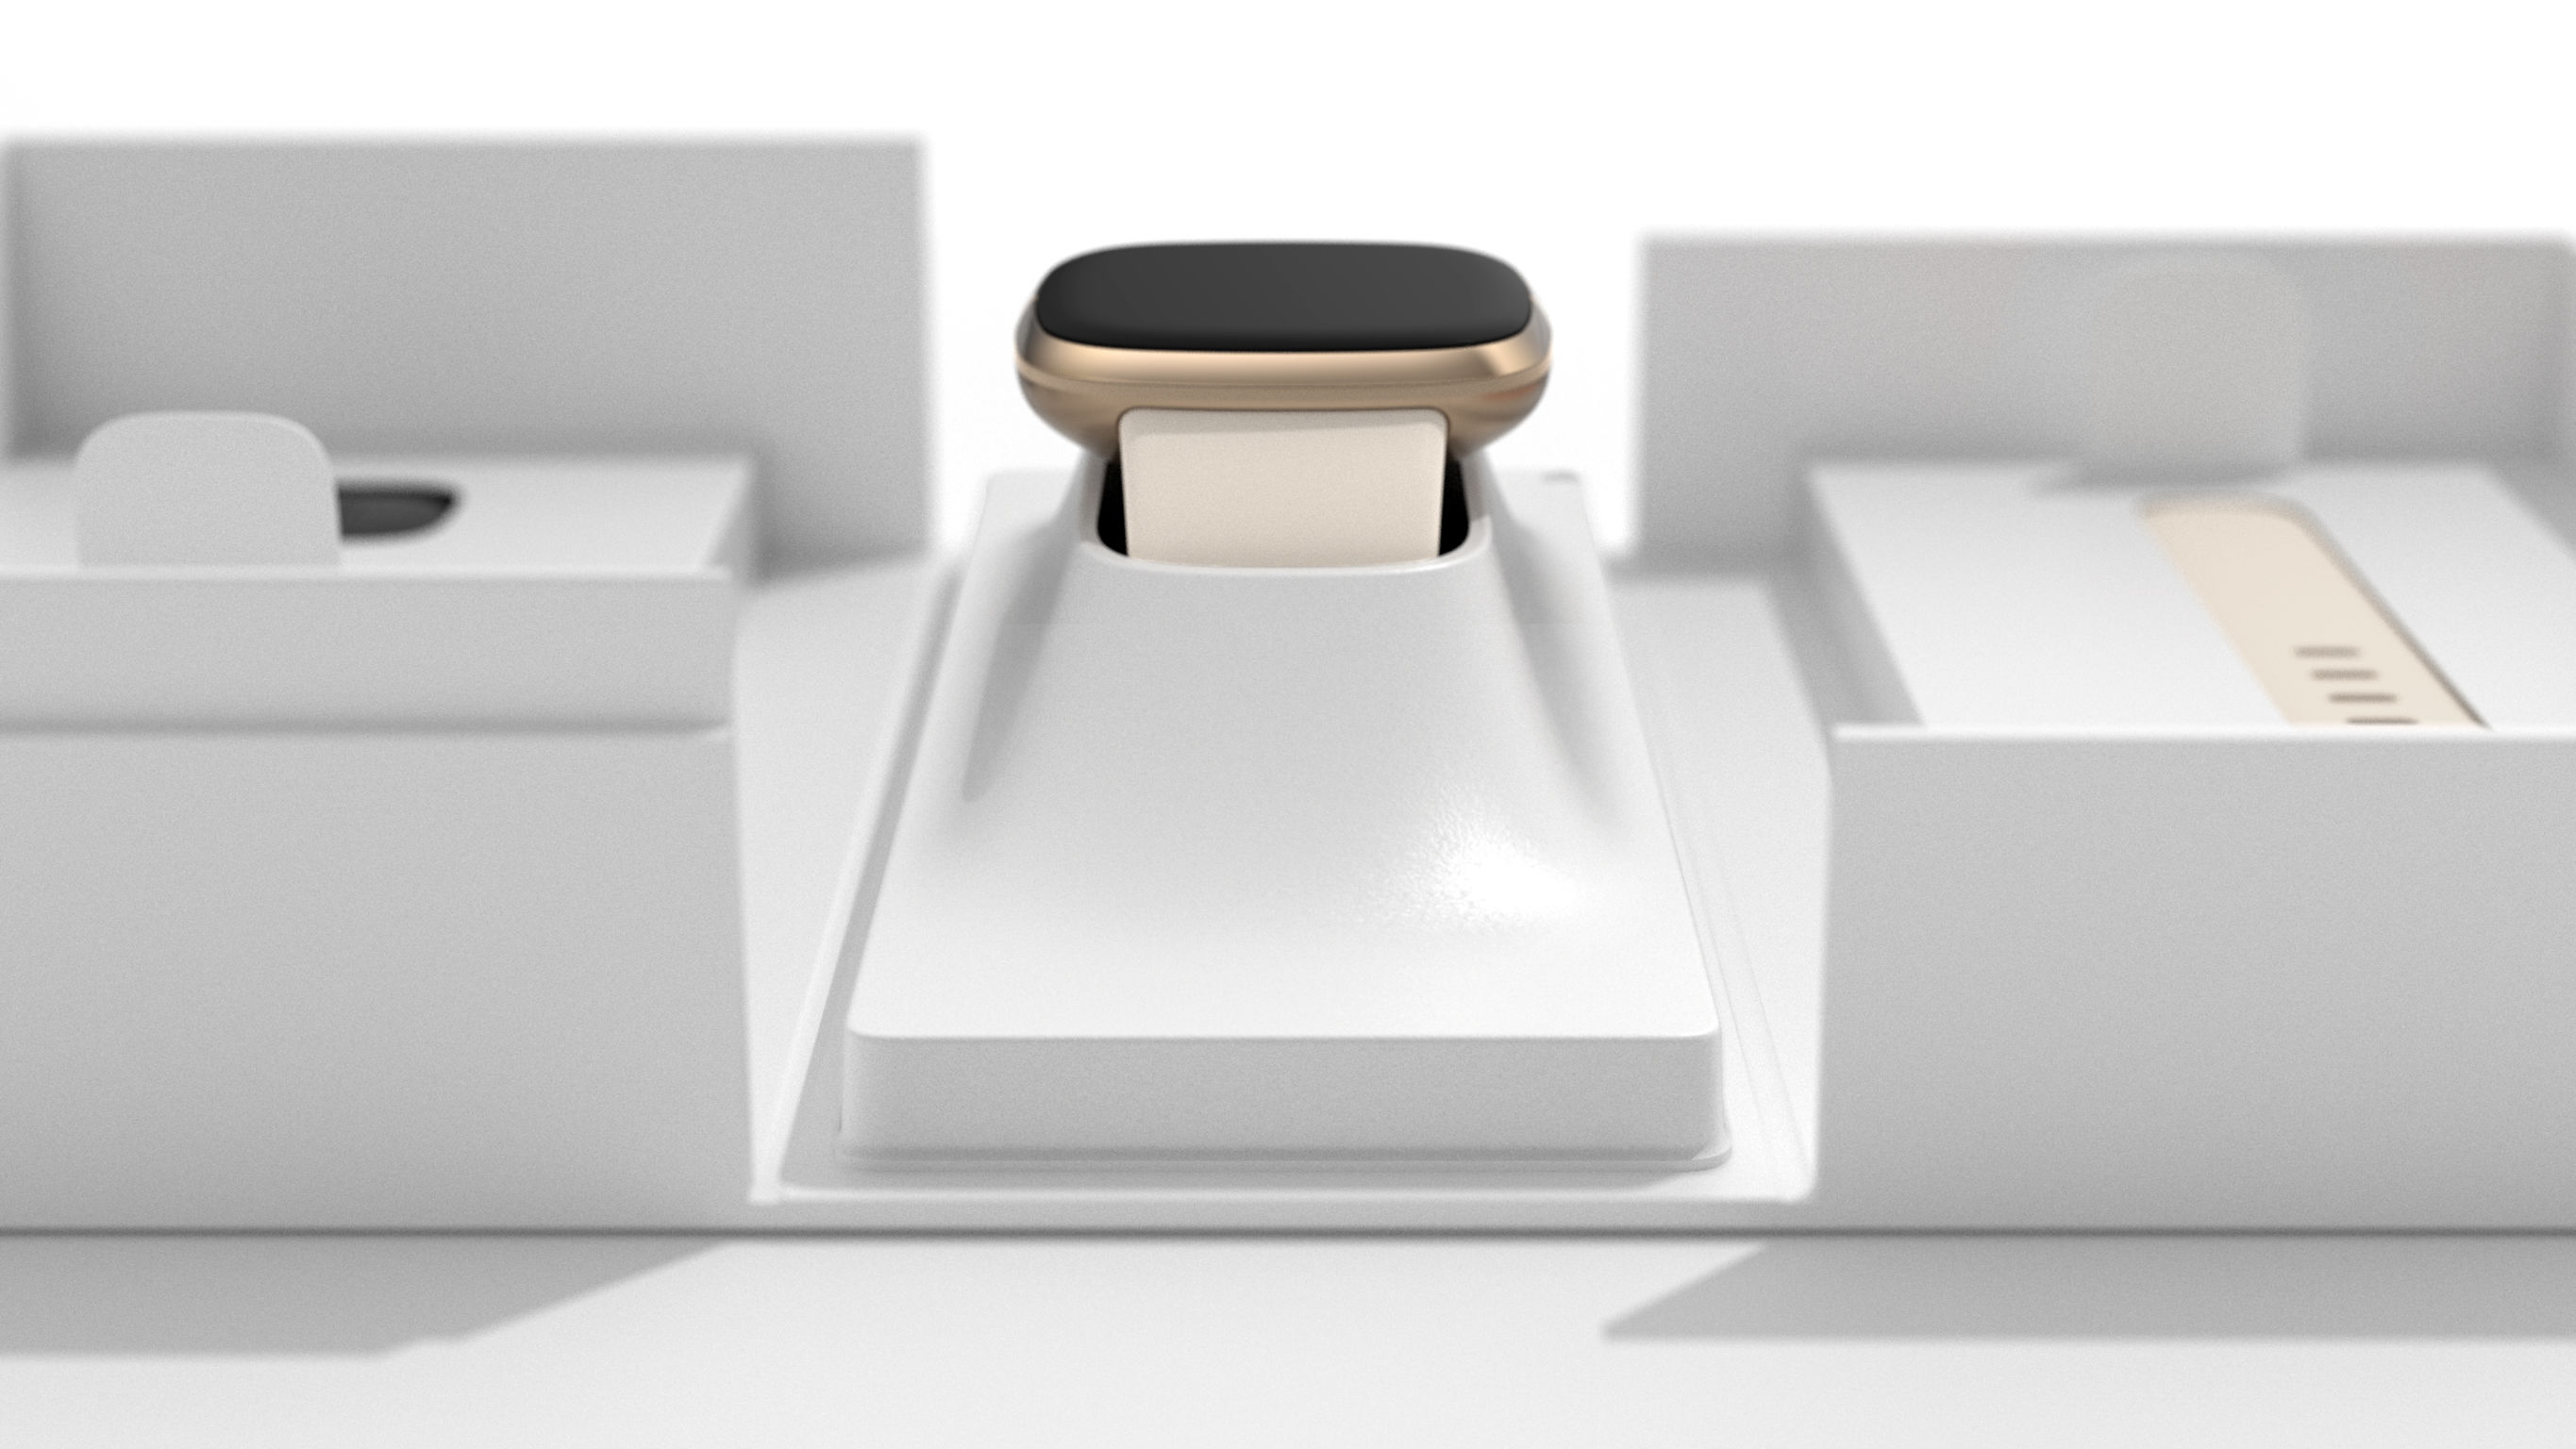 Fitbit Sustainable Packaging